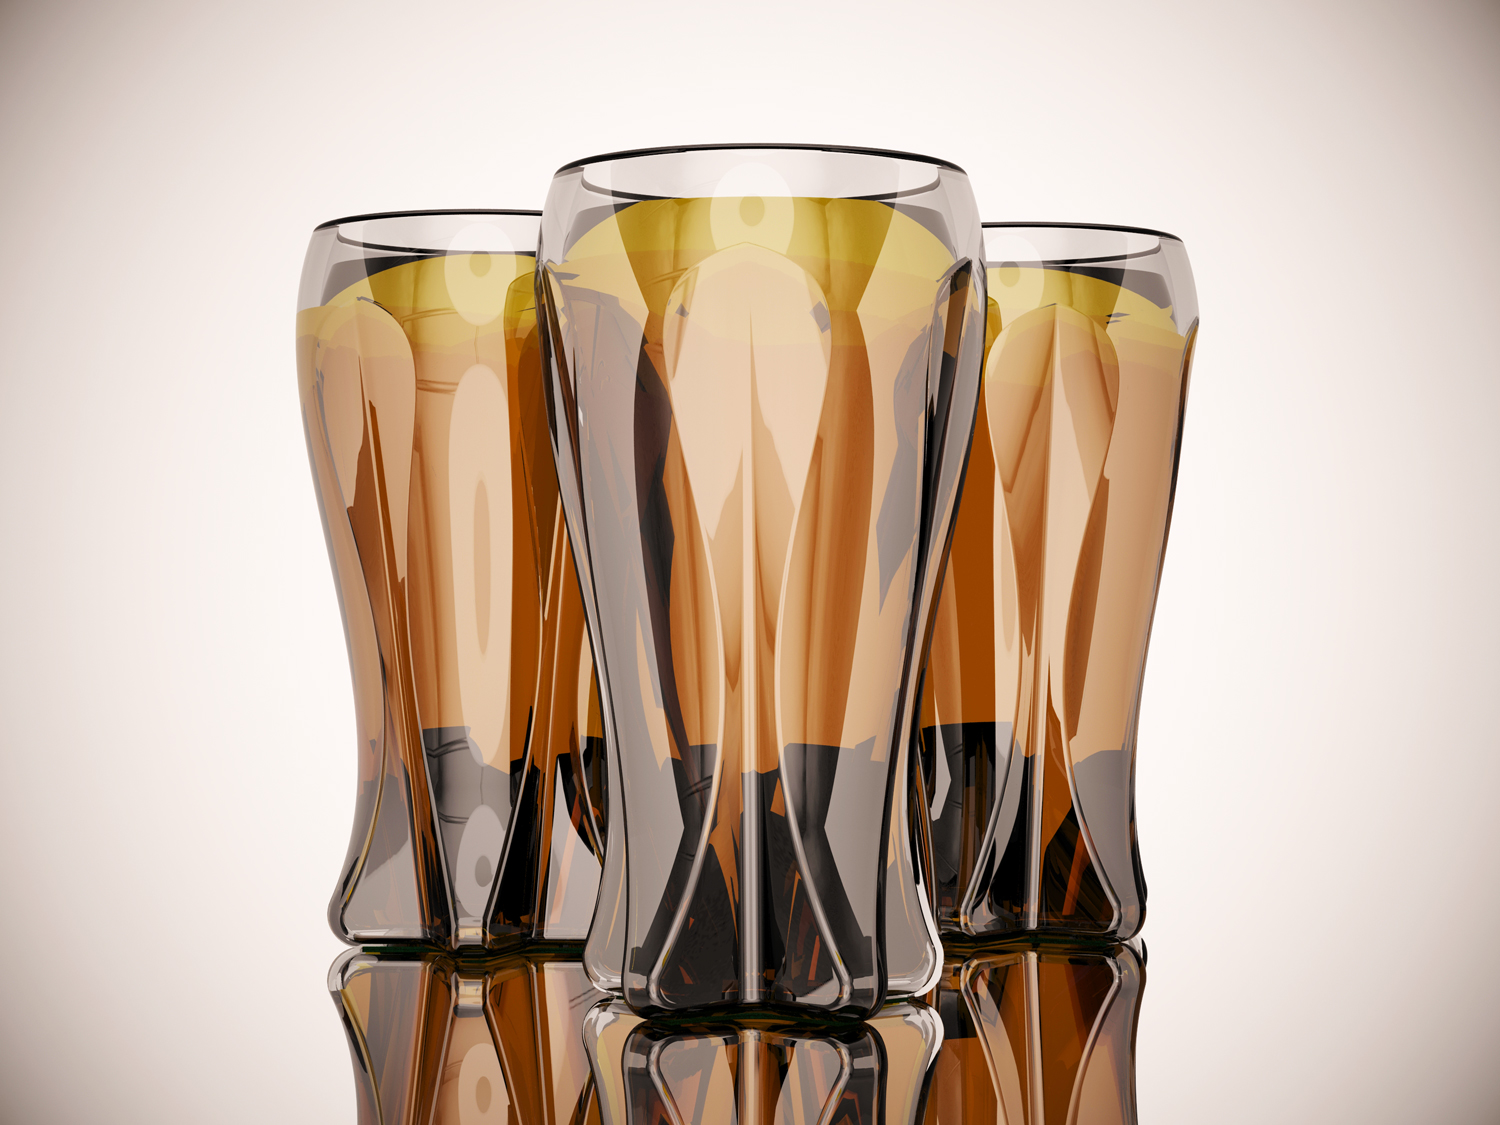 3 tall, amber-colored, double wall beer glasses, with a vertical star shape providing multiple ridges along the sides, a wider mouth and narrower base.